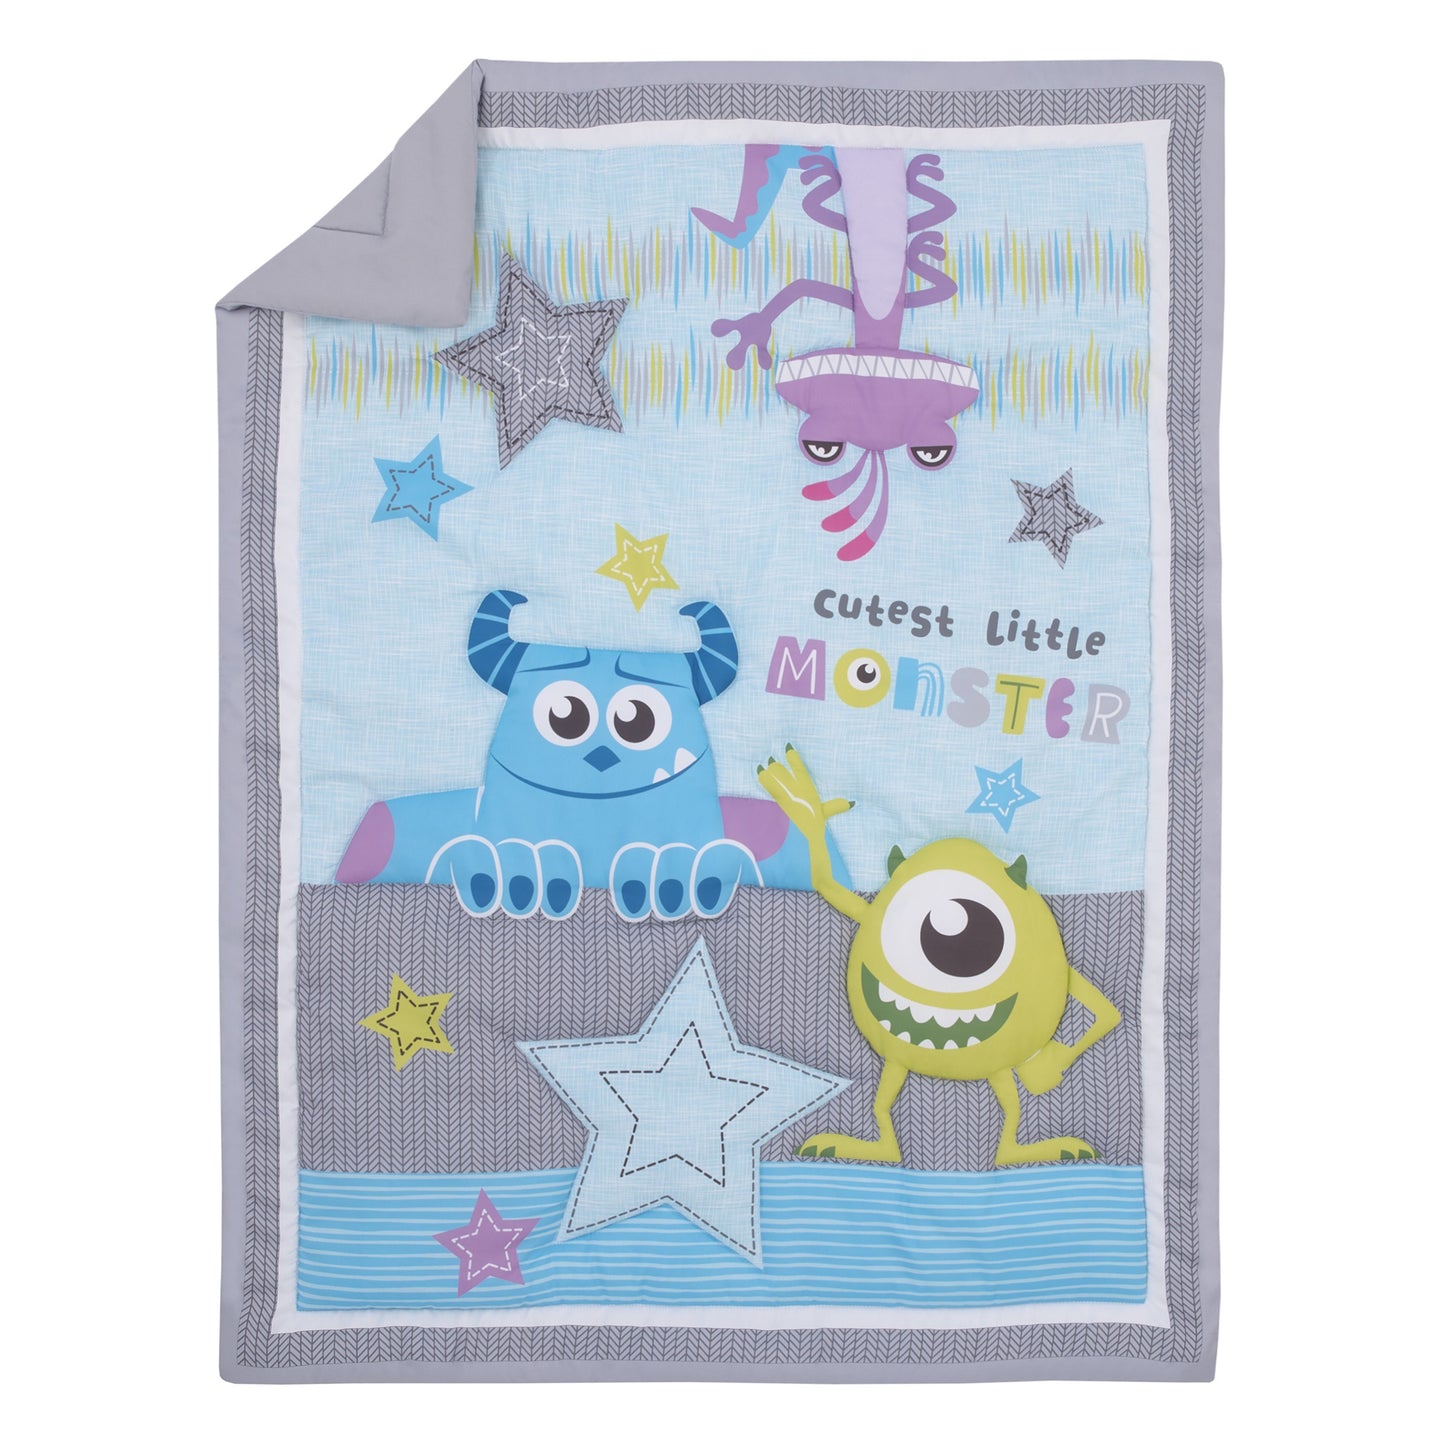 Disney Monsters, Inc. Cutest Little Monster Turquoise, Green, Purple, and Gray, Sully, Mike, and Randall 3 Piece Nursery Mini Crib Bedding Set - Comforter, and Two Fitted Mini Crib Sheets